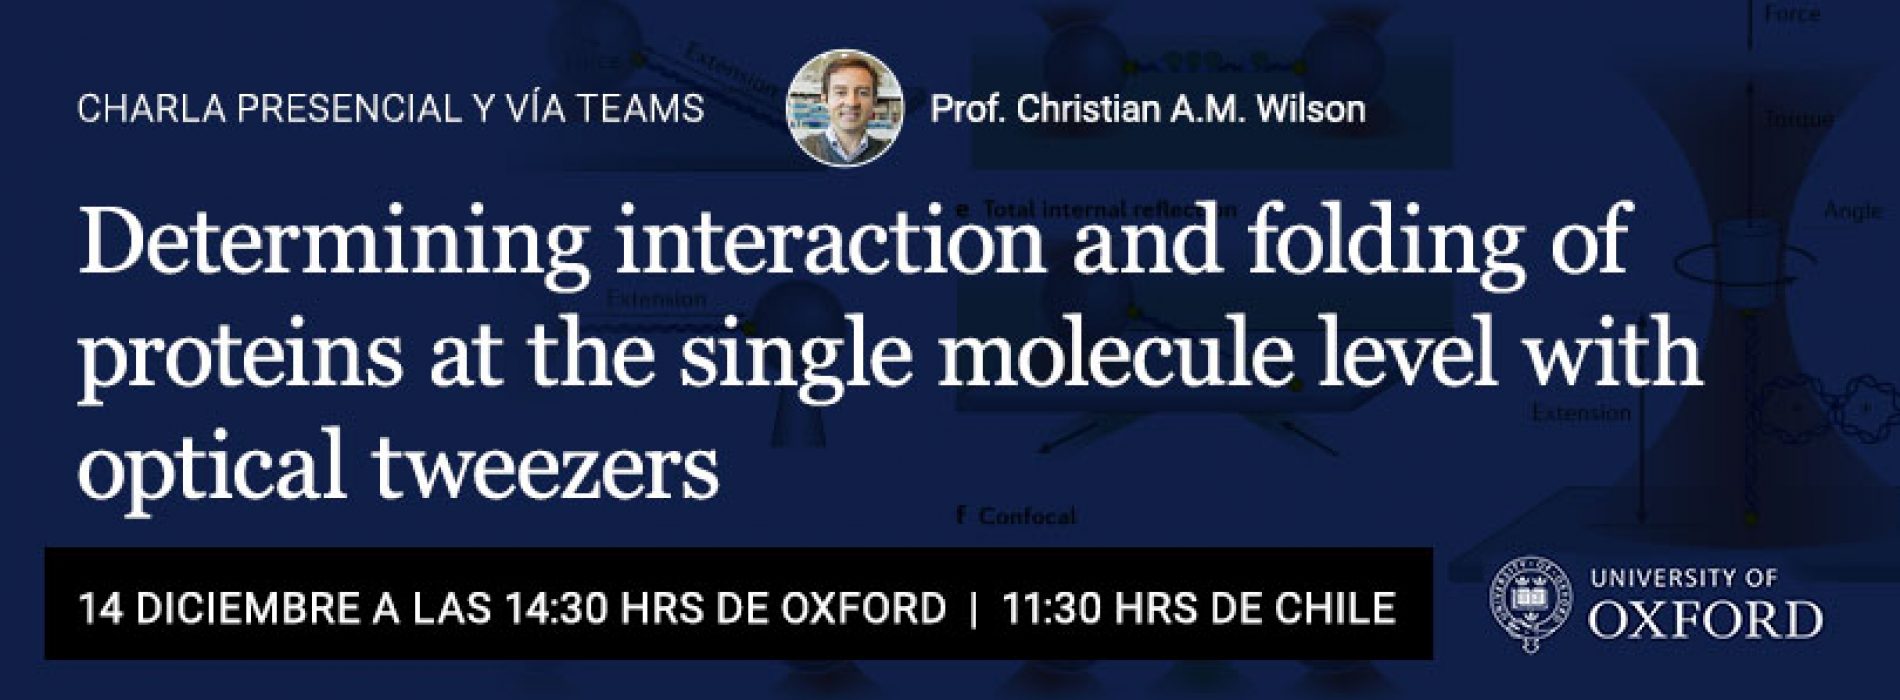 Charla «Determining interaction and folding of proteins at the single molecule level with optical tweezers»